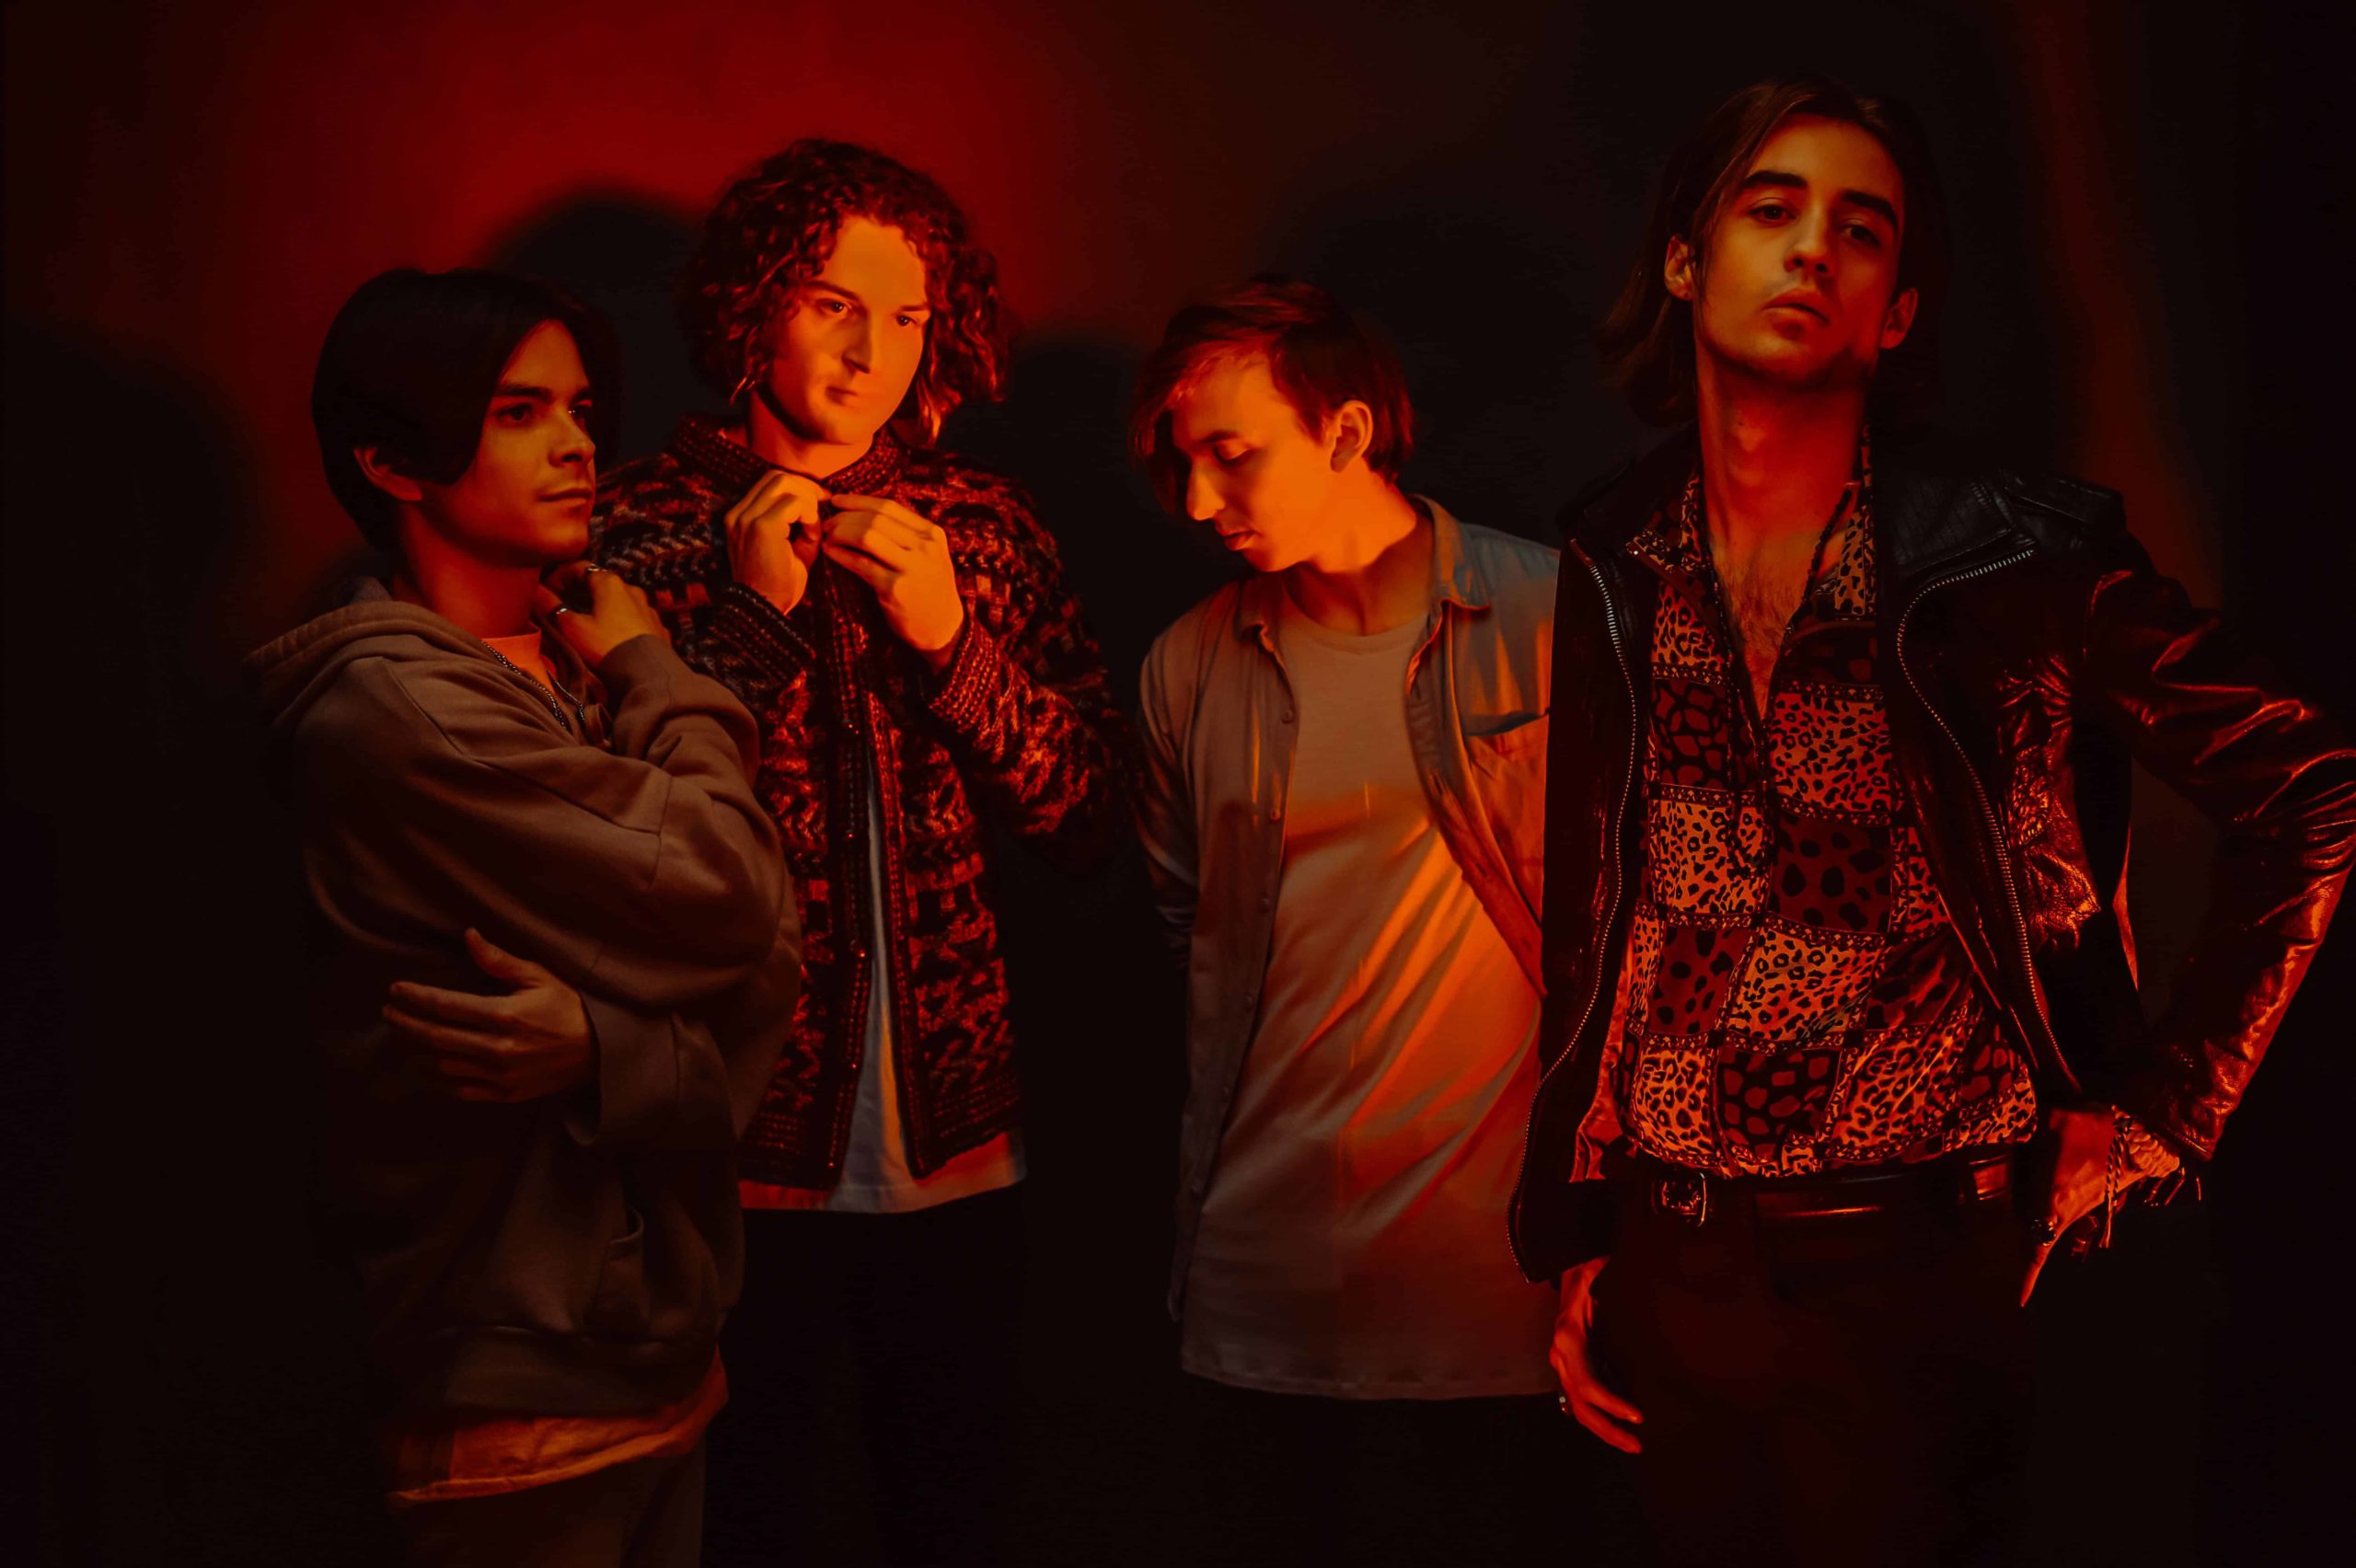 The Faim Share “Humans” Music Video - Burning Hot Events